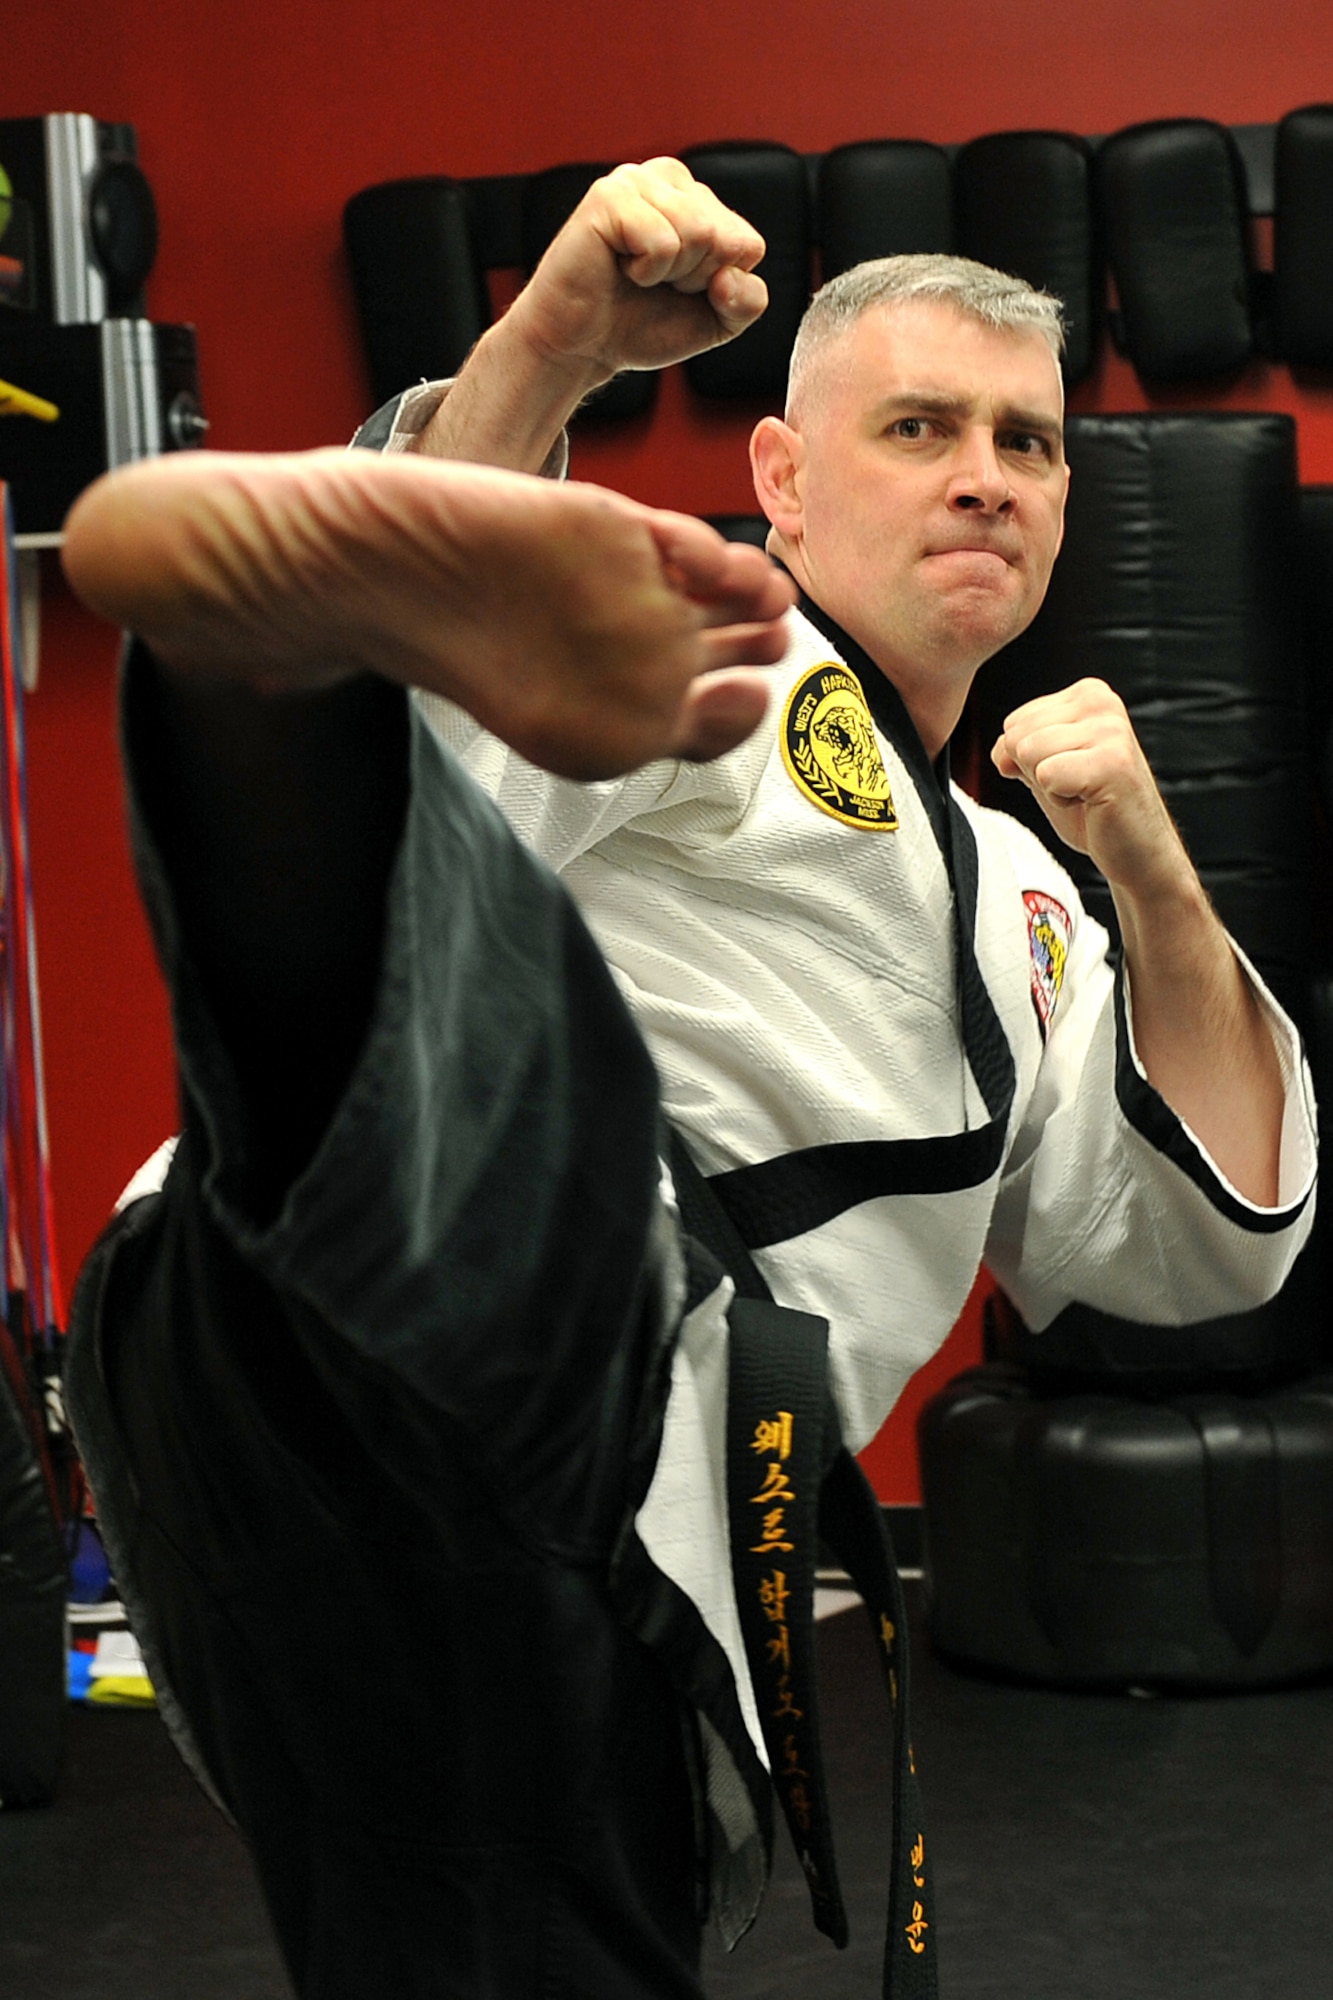 OFFUTT AIR FORCE BASE, Neb. - Technical Sgt. Michael Munyon, with the 55th Security Forces Squadron, practices sidekicks prior to teaching a hapkido class at an Omaha dojang March 12. Sergeant Munyon currently holds a 5th degree black belt in Taekwondo and a 2nd degree black belt in Hapkido, another form of Korean martial arts. He was recently inducted into the Masters Hall of Fame.

U.S. Air Force photo by Charles Haymond